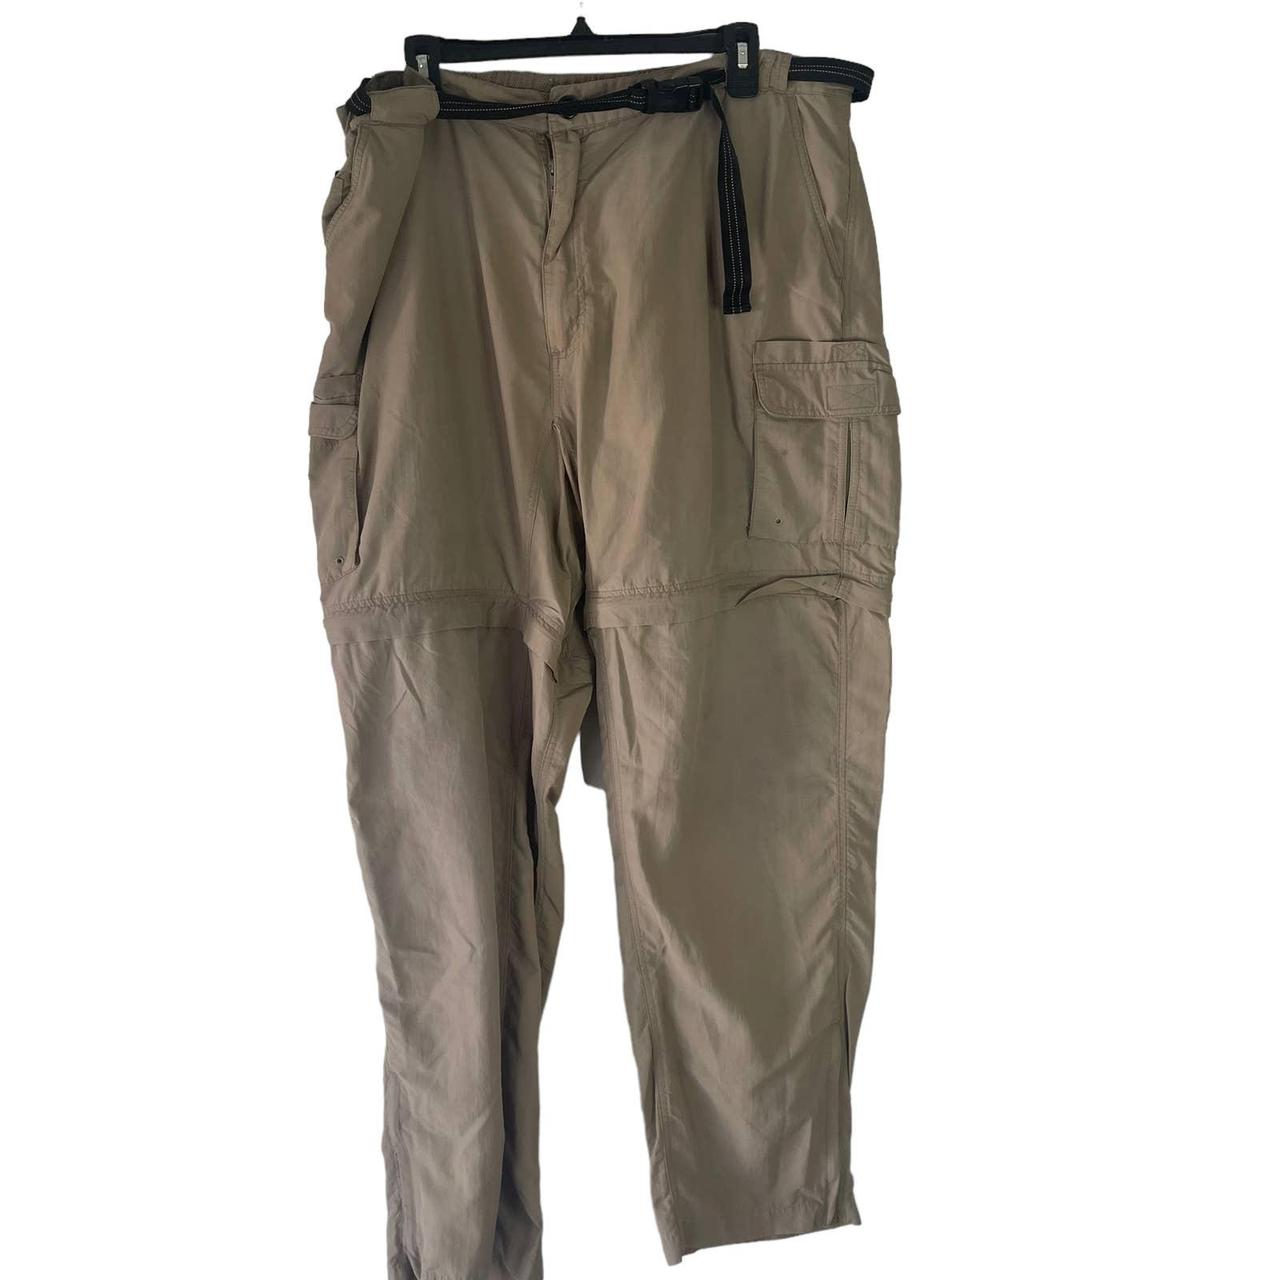 Chauncey cargo pants fit? : r/KithNYC